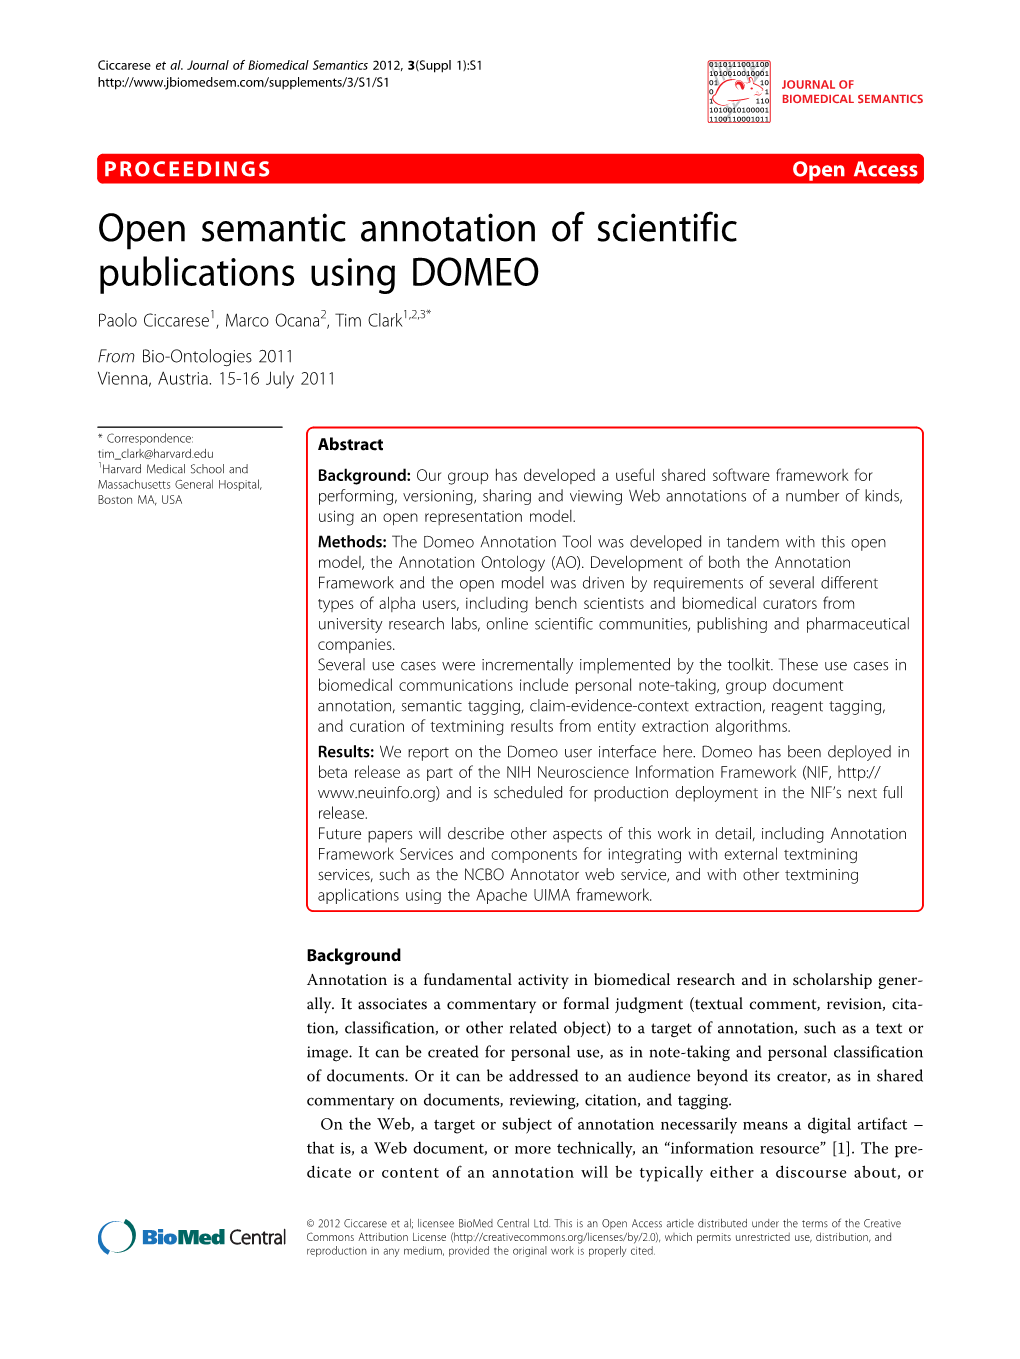 Open Semantic Annotation of Scientific Publications Using DOMEO Paolo Ciccarese1, Marco Ocana2, Tim Clark1,2,3* from Bio-Ontologies 2011 Vienna, Austria